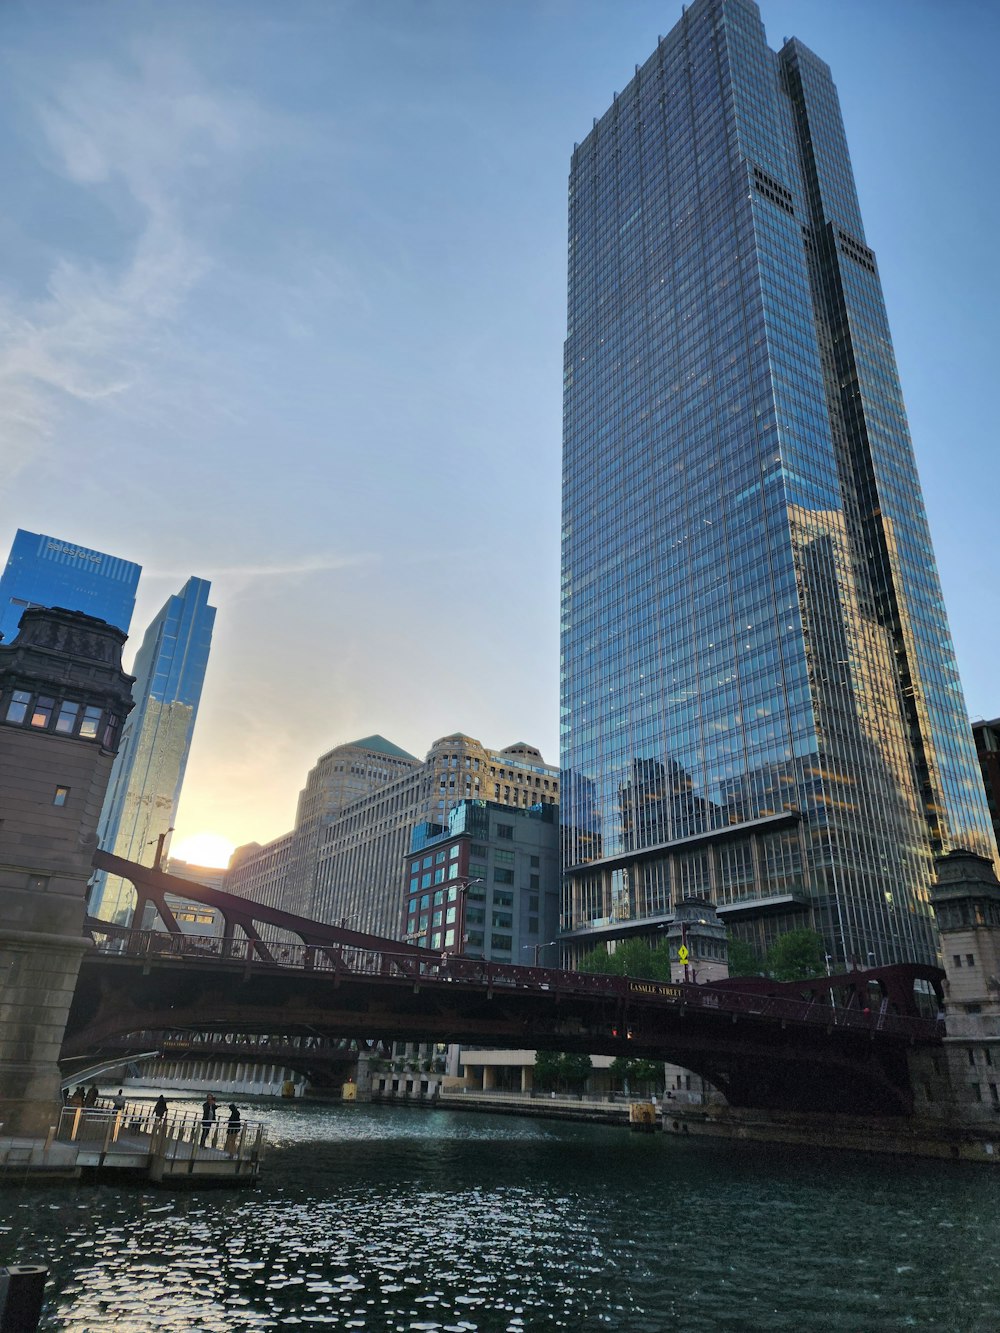 a bridge over a body of water in front of tall buildings